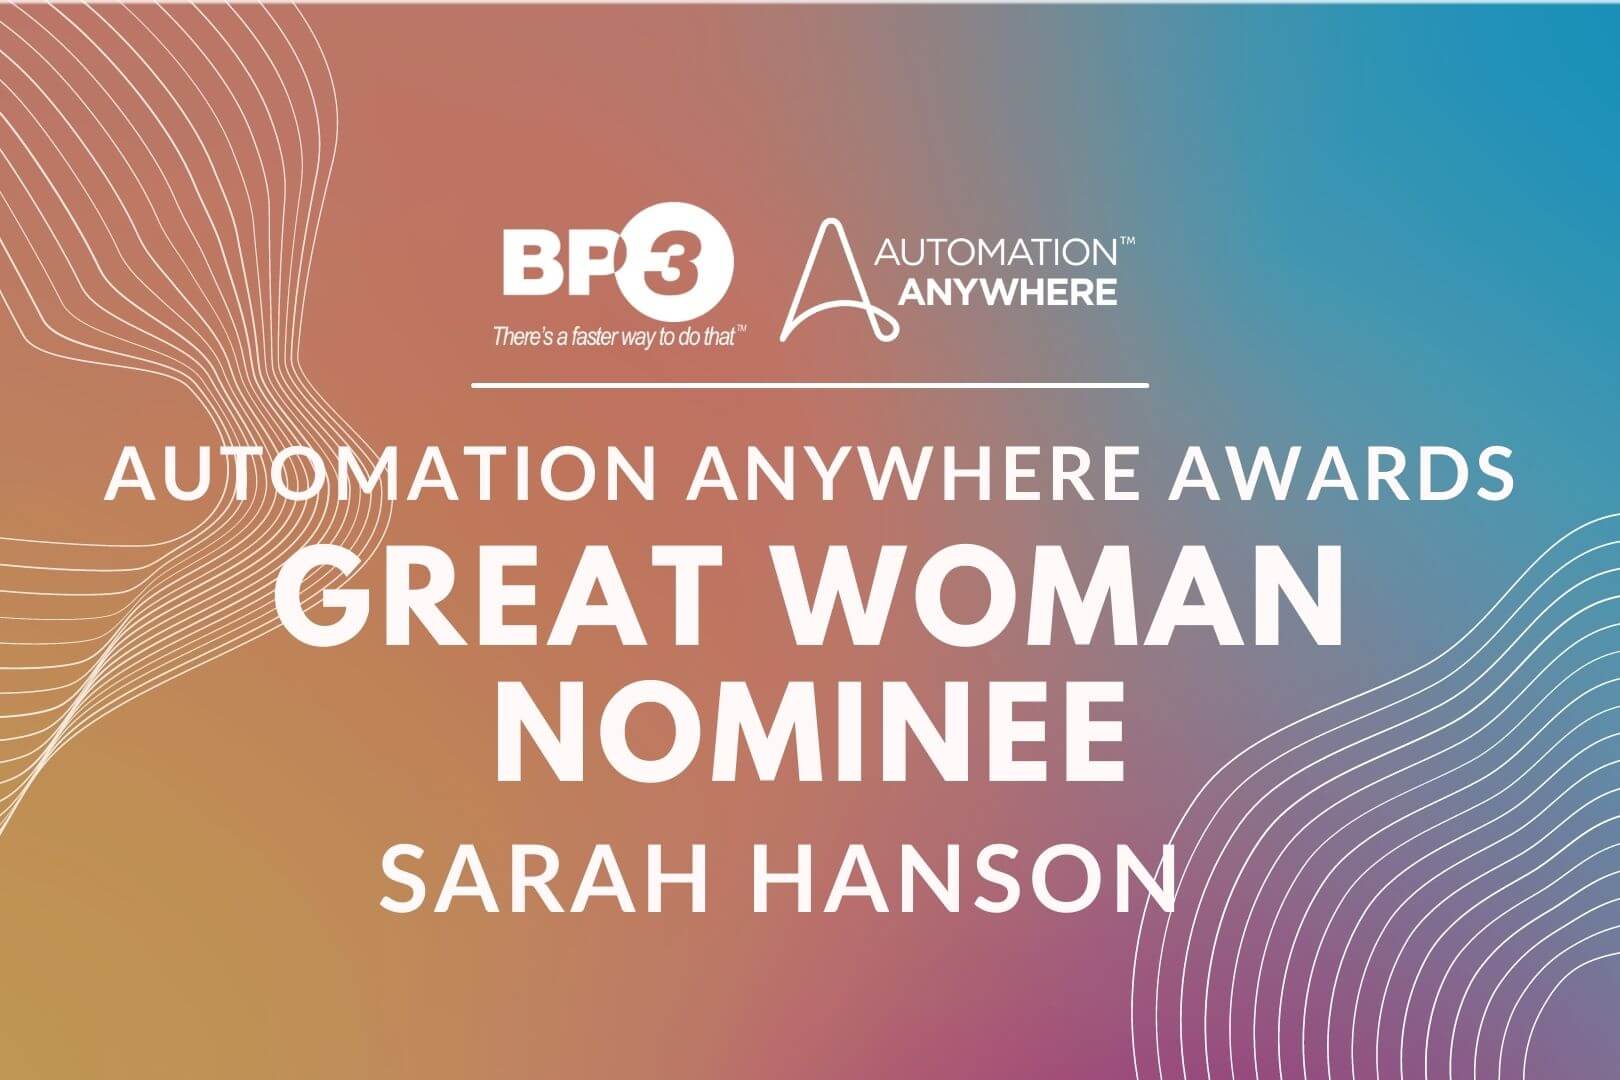 Sarah Hanson Nominated for the Automation Anywhere Great Woman Award